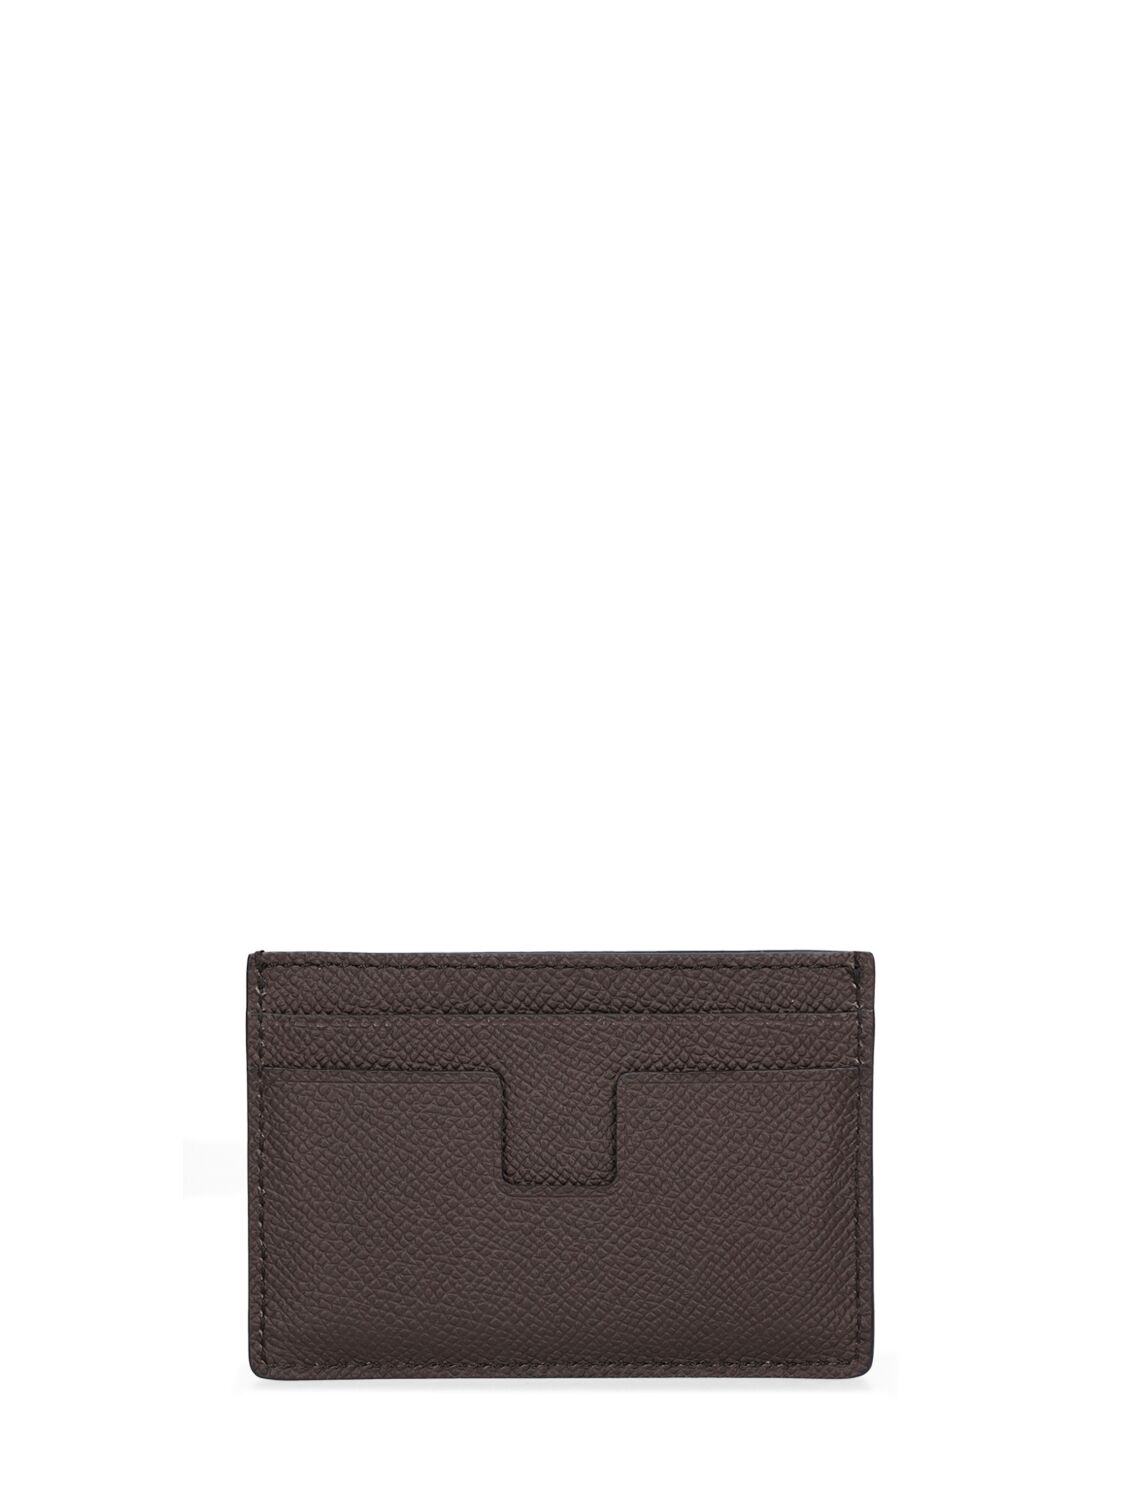 Shop Tom Ford Small Grain Saffiano Leather Card Case In Chocolate